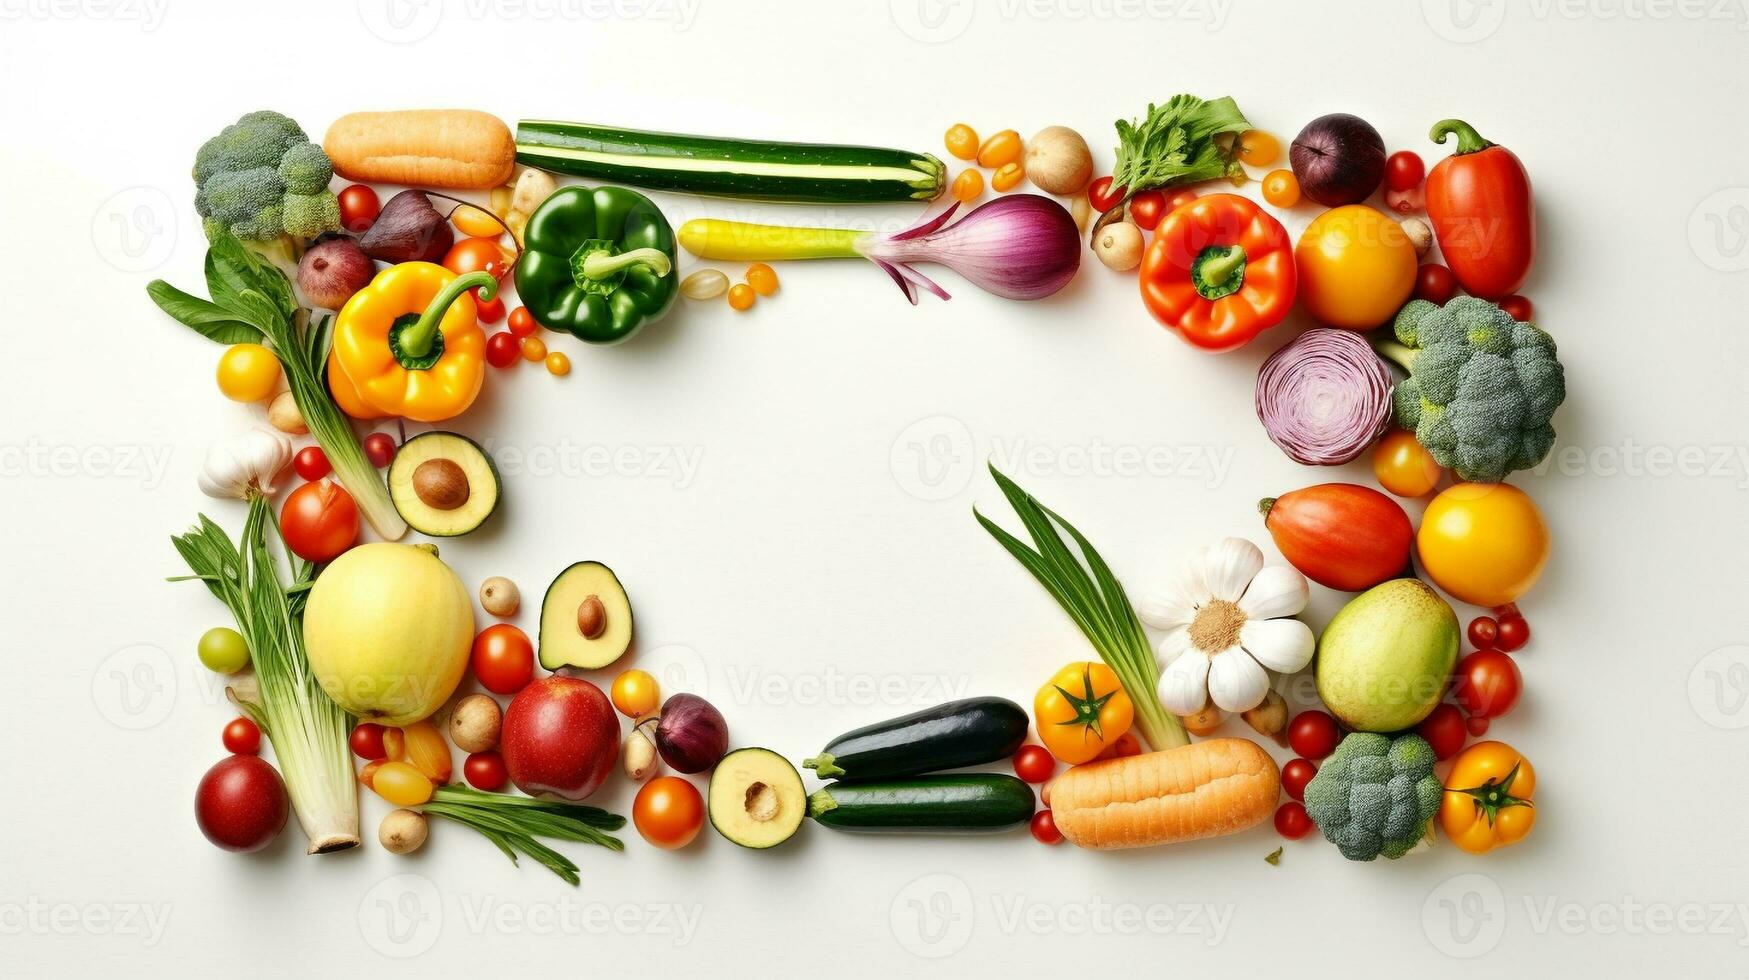 Healthy food and diet concept photo